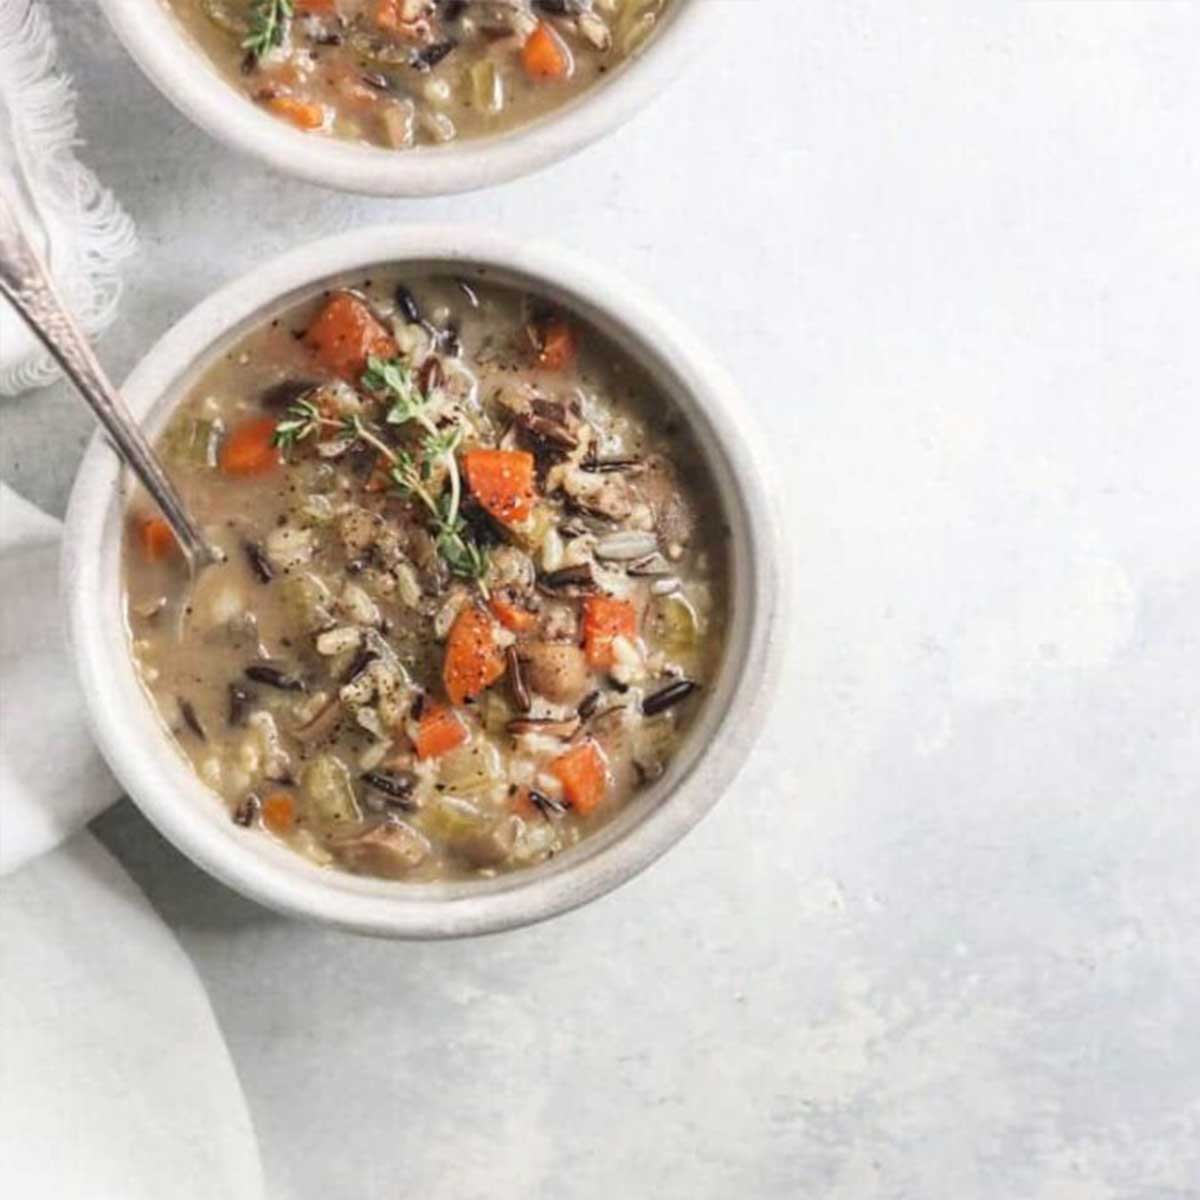 Instapot wild rice and mushroom soup